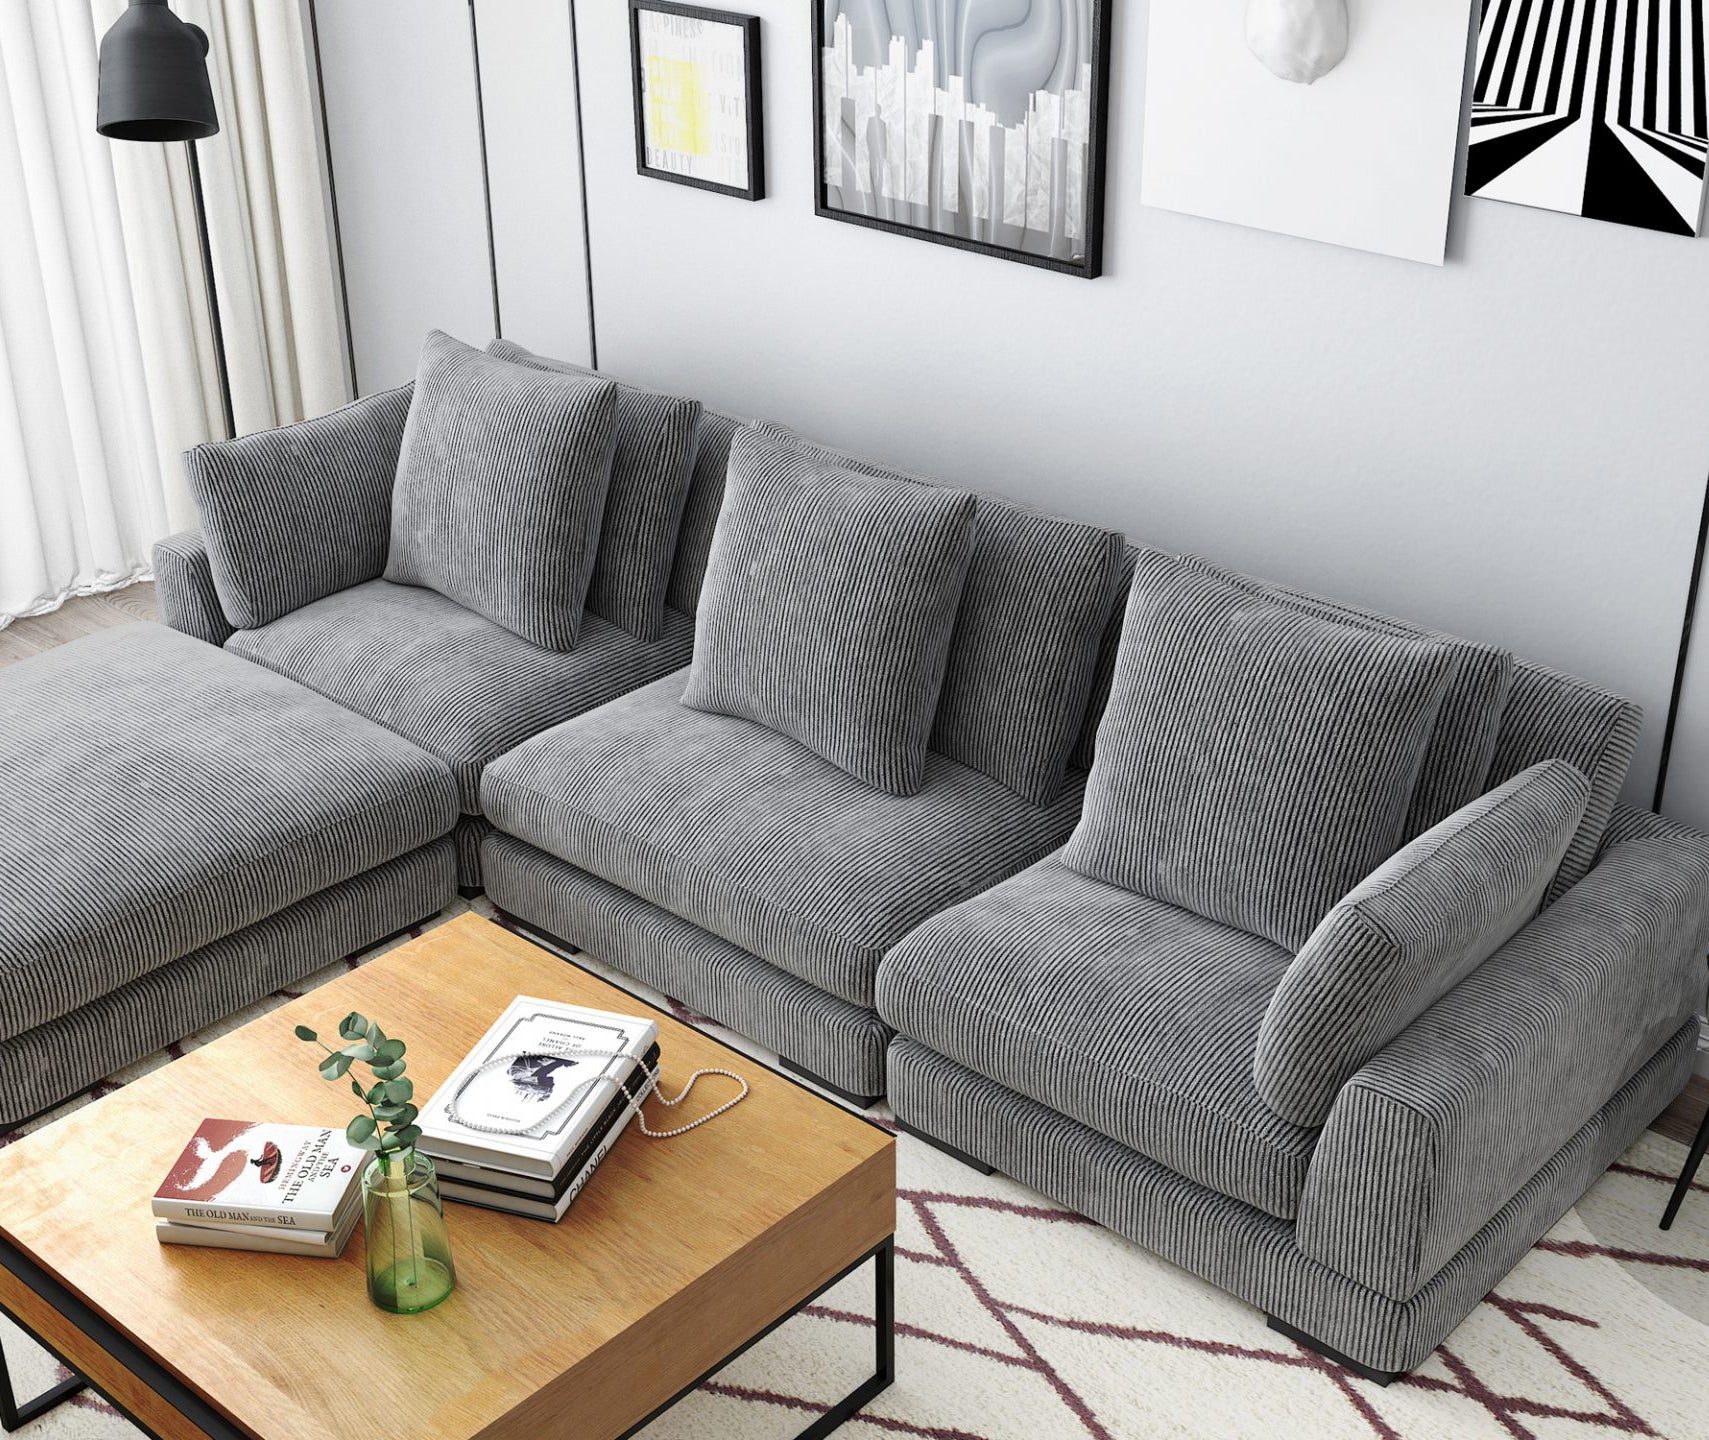 Tumble Modular Sectional - Build Your Own